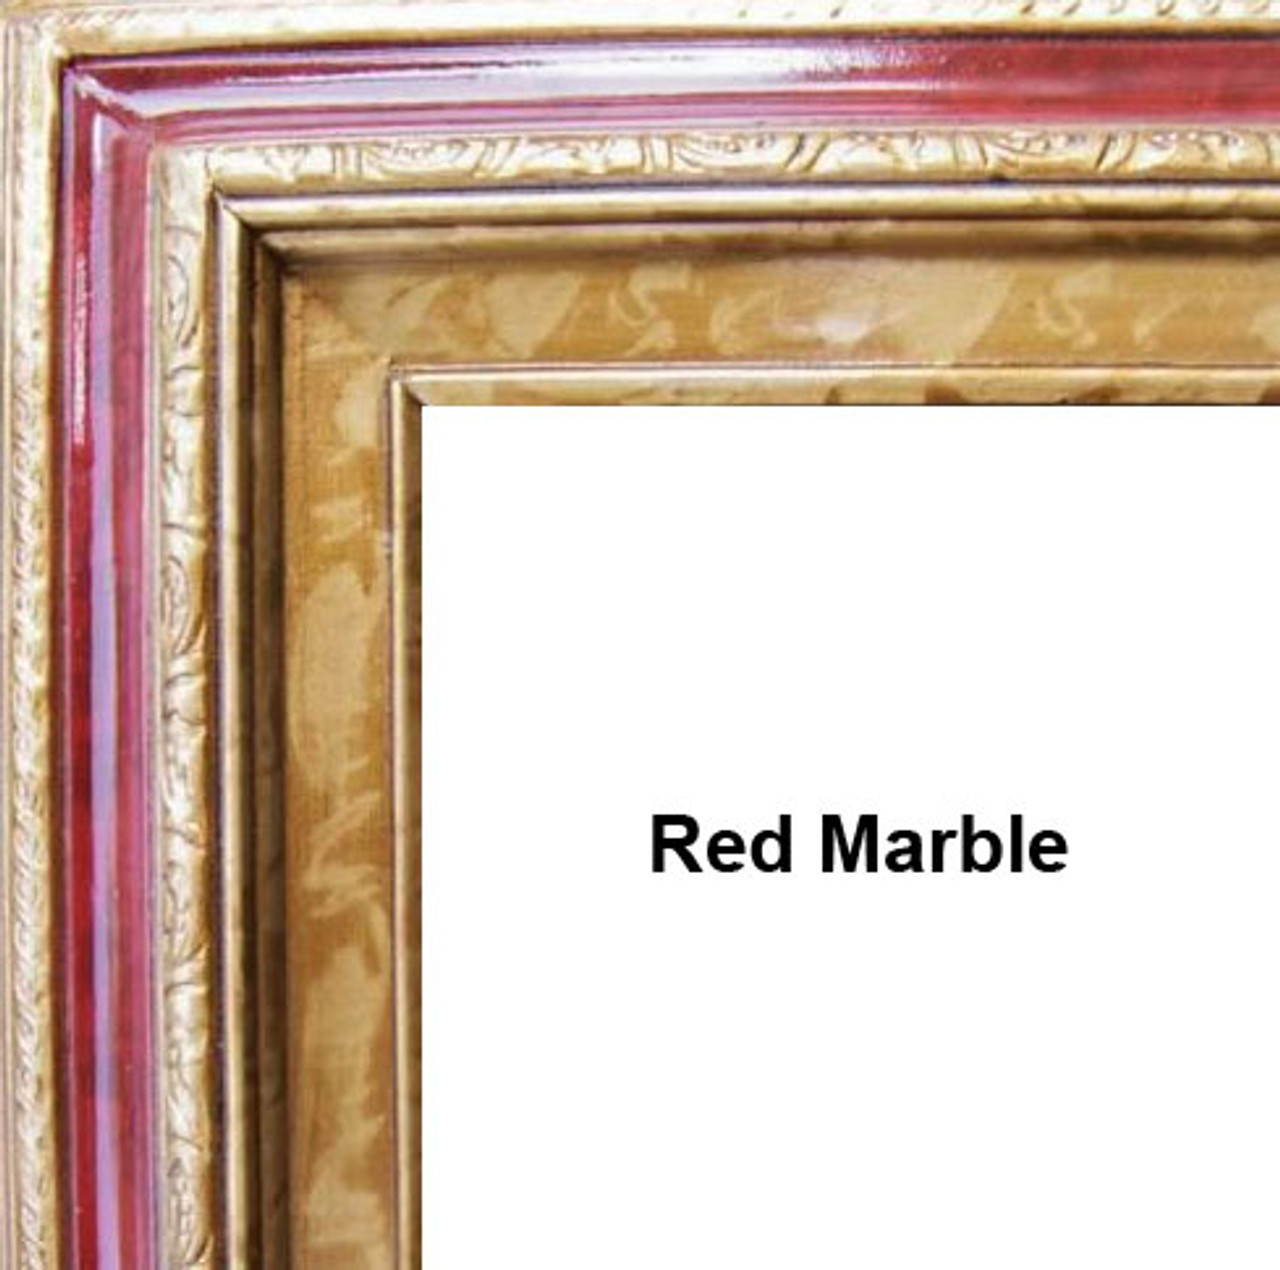 15% OFF - 3 Inch Deluxe Wood Frames Clearance Sale: 14X20*